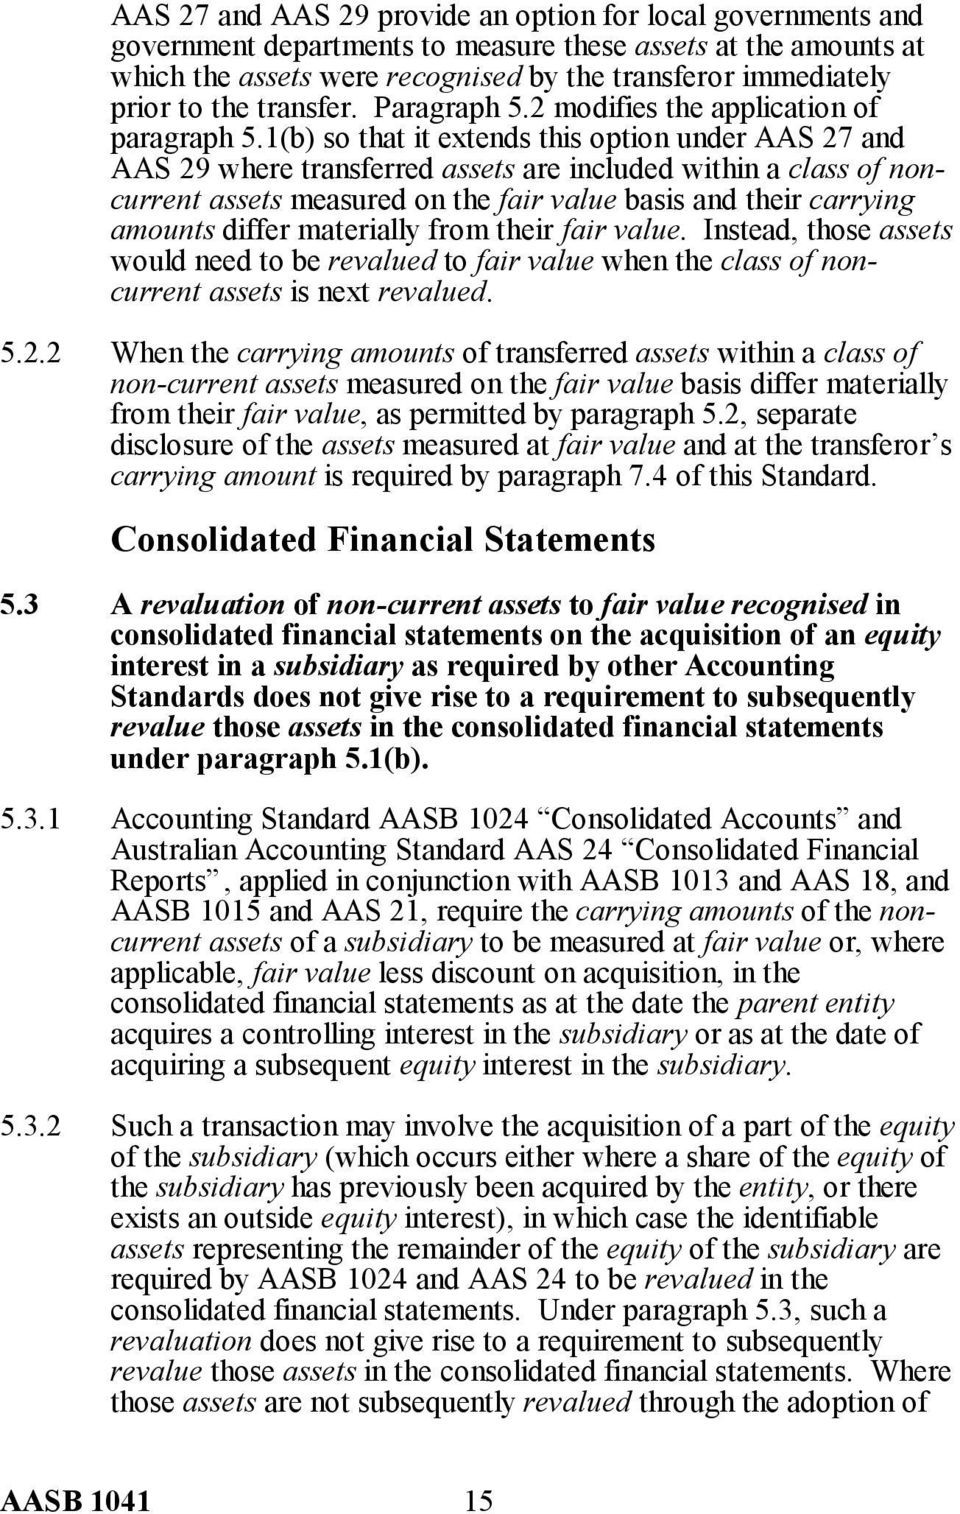 1 so that it extends this option under AAS 27 and AAS 29 where transferred assets are included within a class of noncurrent assets measured on the fair value basis and their carrying amounts differ